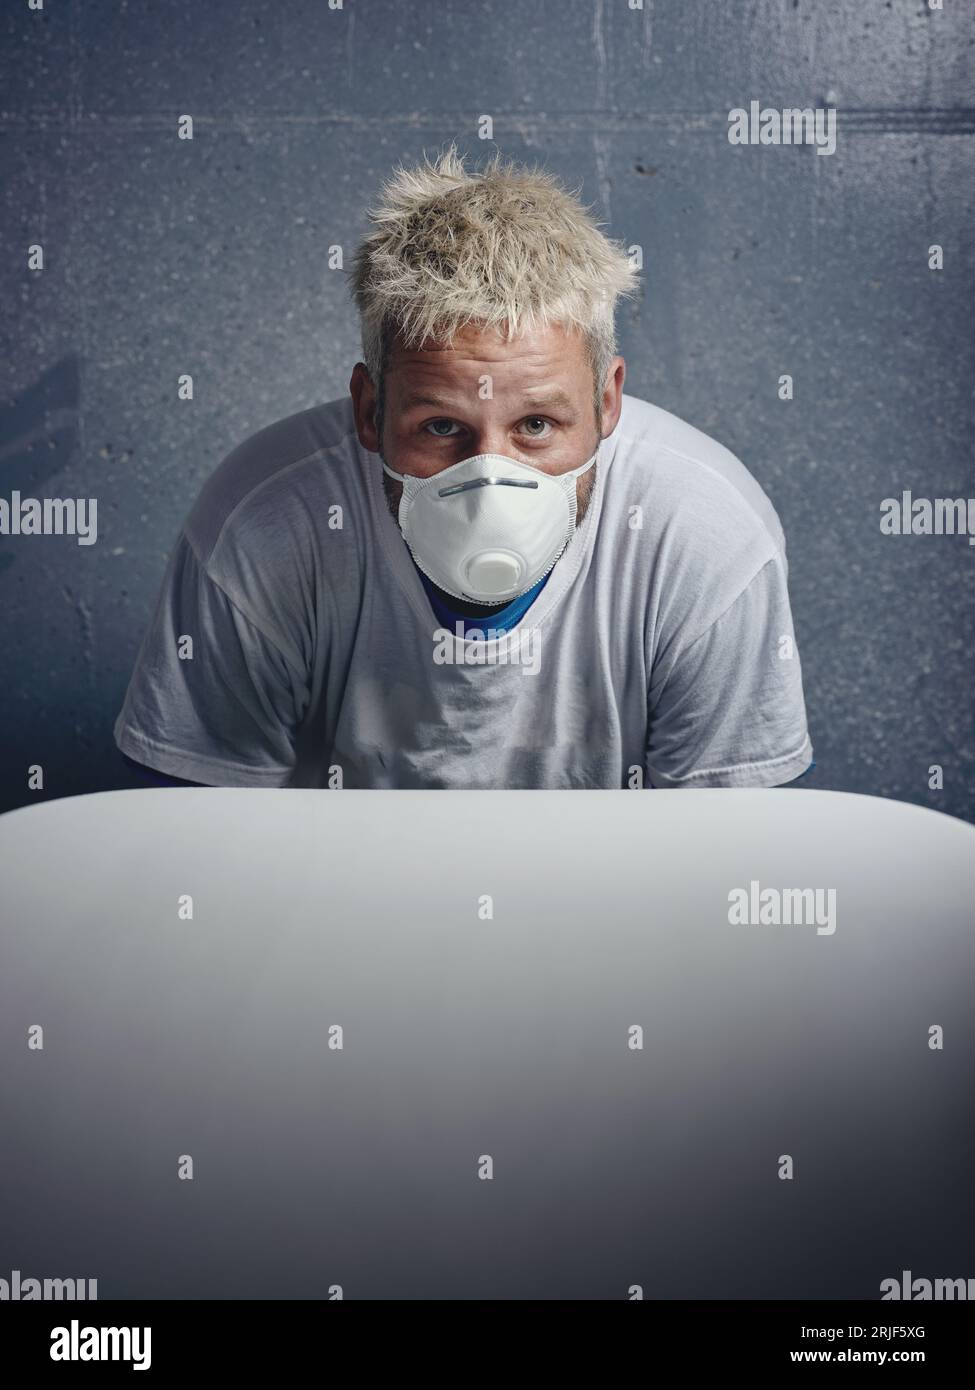 Focused blond haired male shaper wearing protective respirator mask while making white surfboard and looking at camera against gray wall Stock Photo